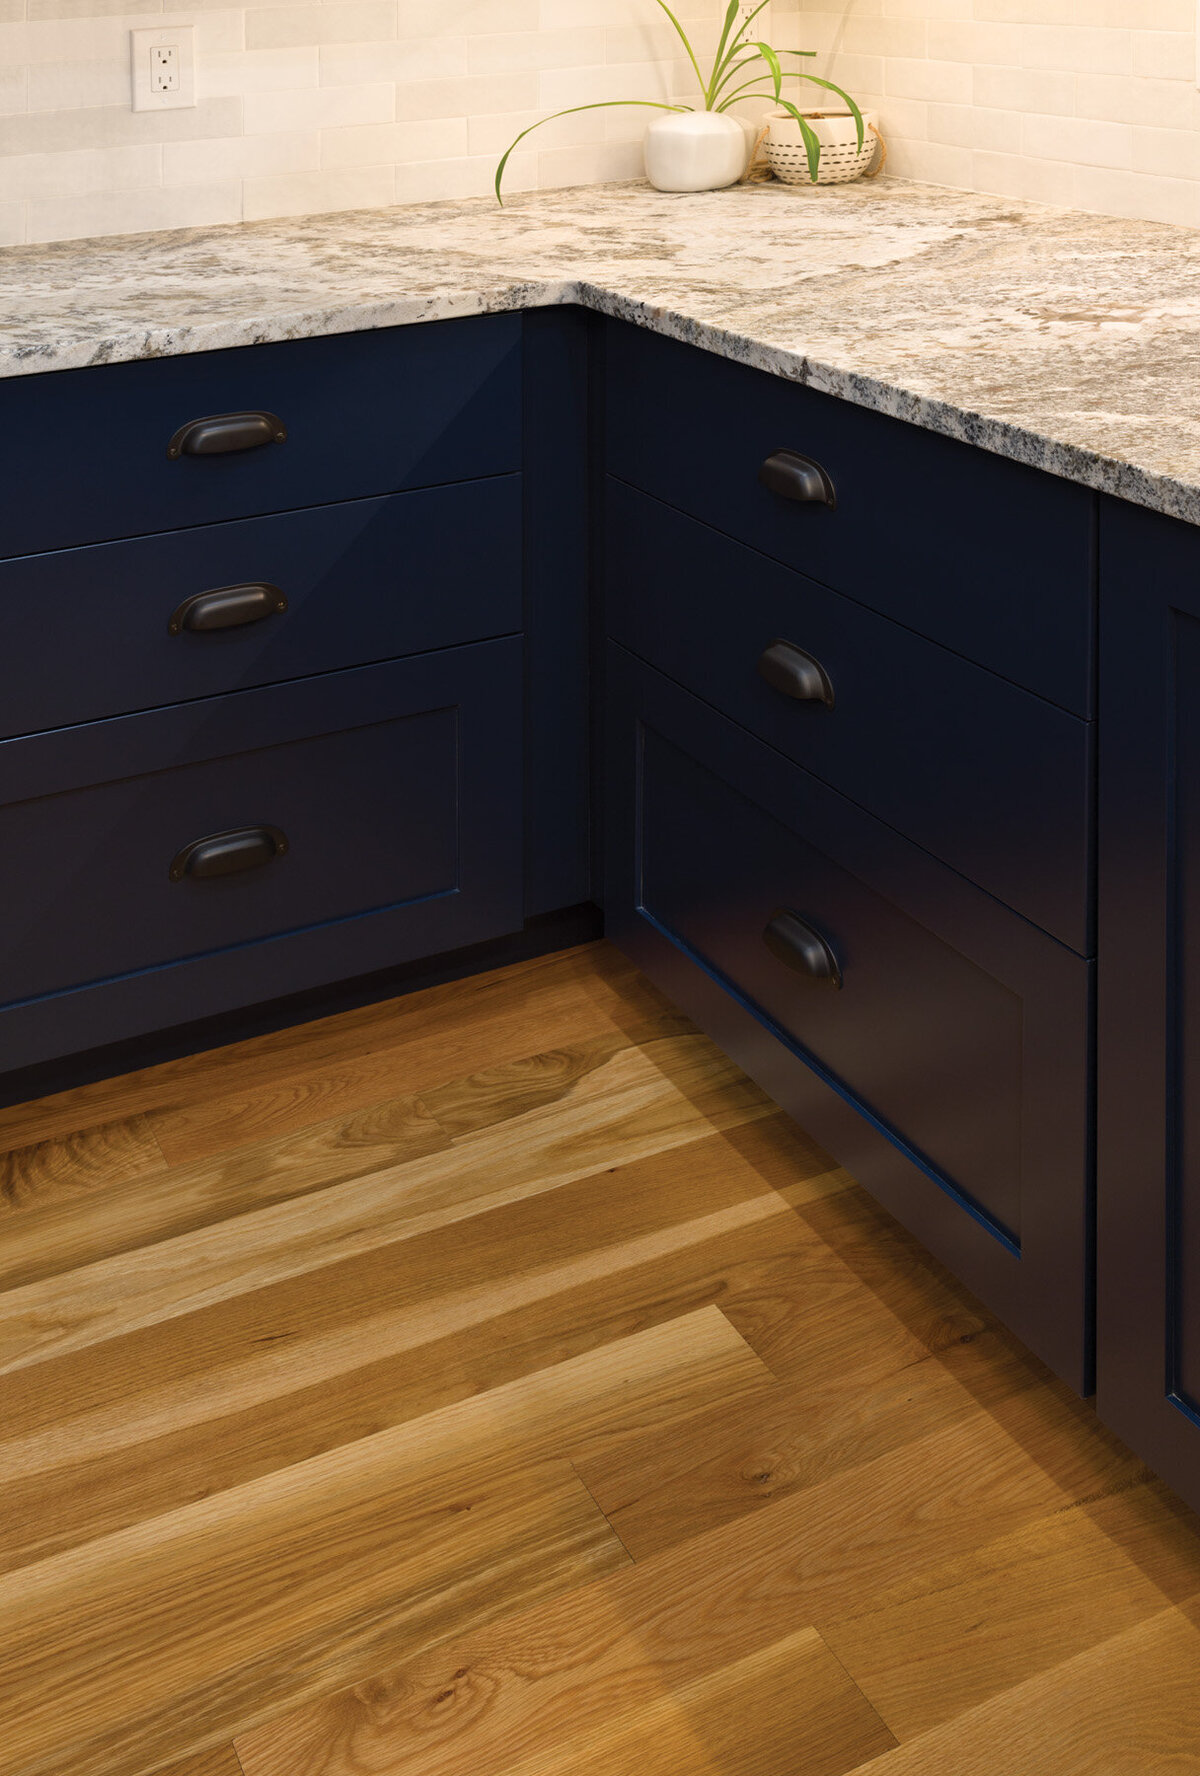 jamie-nell-design-woodland-hills-huntwood-cabinetry (3)